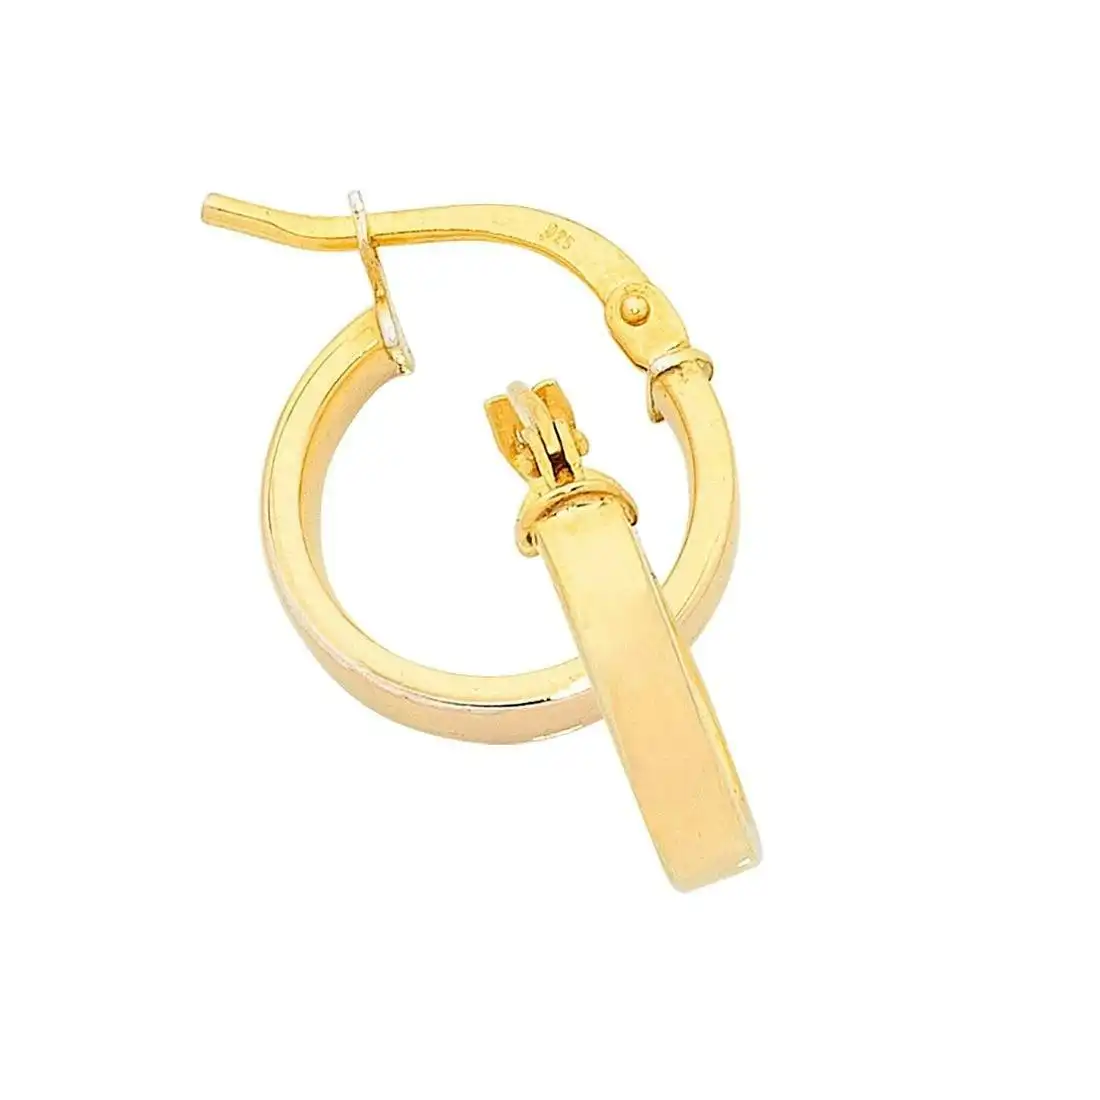 9ct Yellow Gold Silver Infused Plain Square Hoop Earrings- 2mm x 15mm